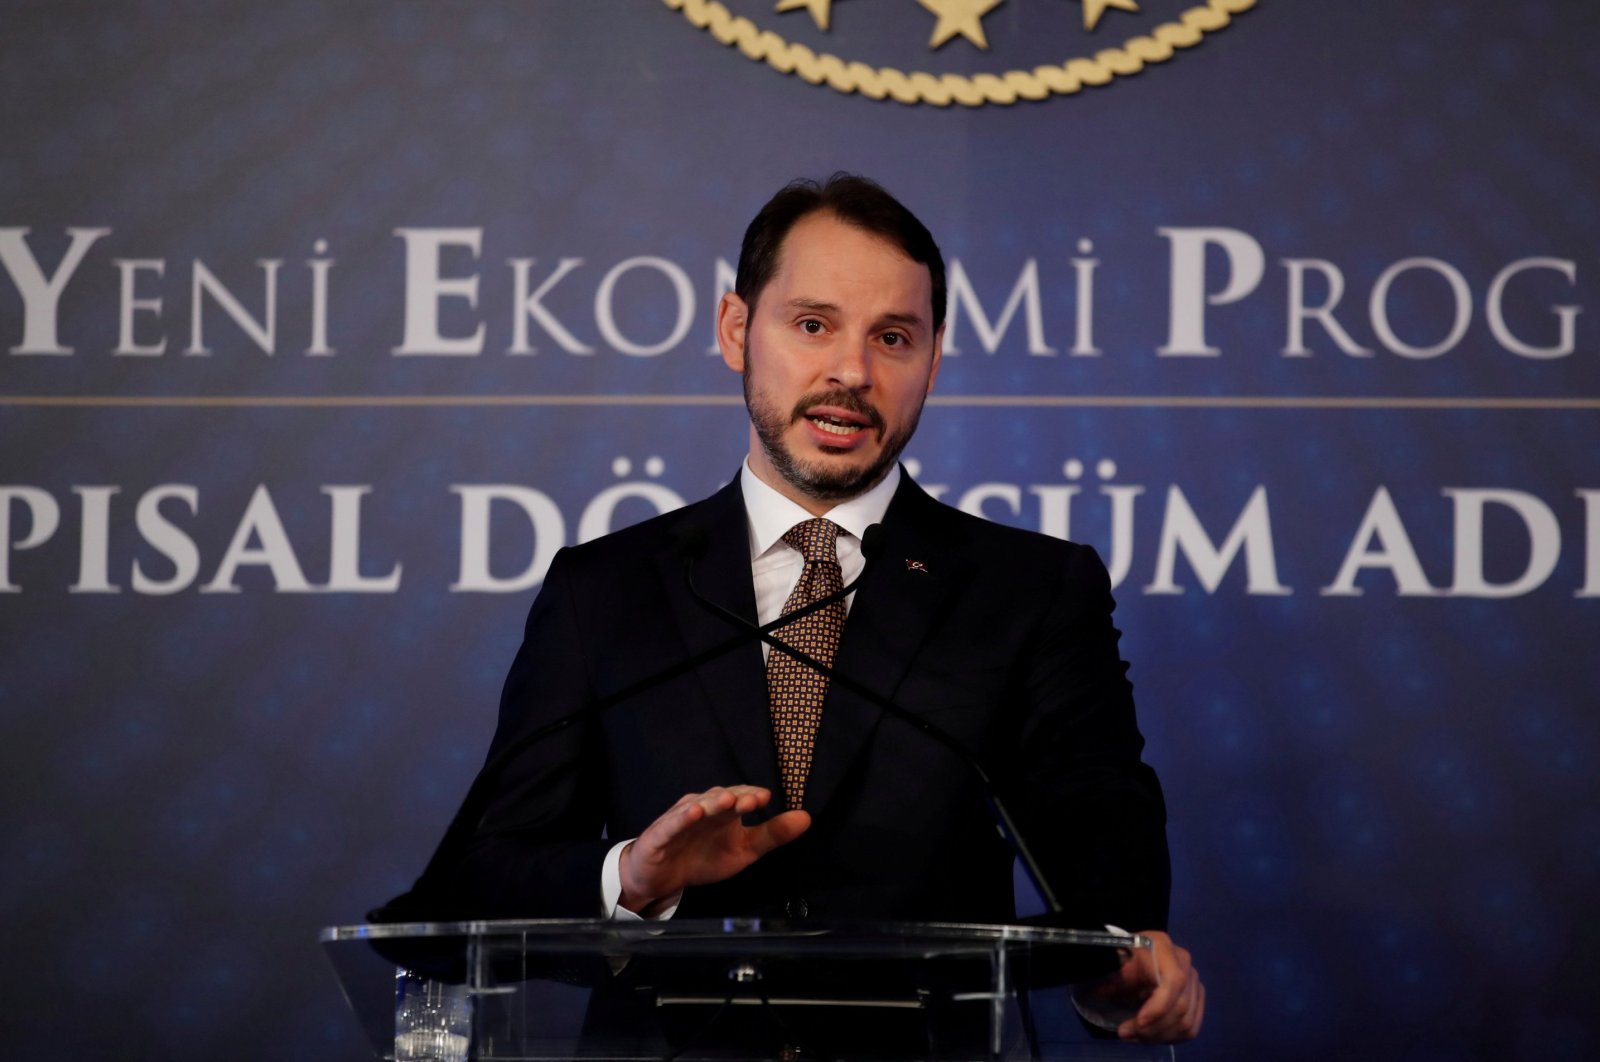 Former Treasury and Finance Minister Berat Albayrak attends a news conference in Istanbul, Turkey, April 10, 2019. (Reuters Photo)